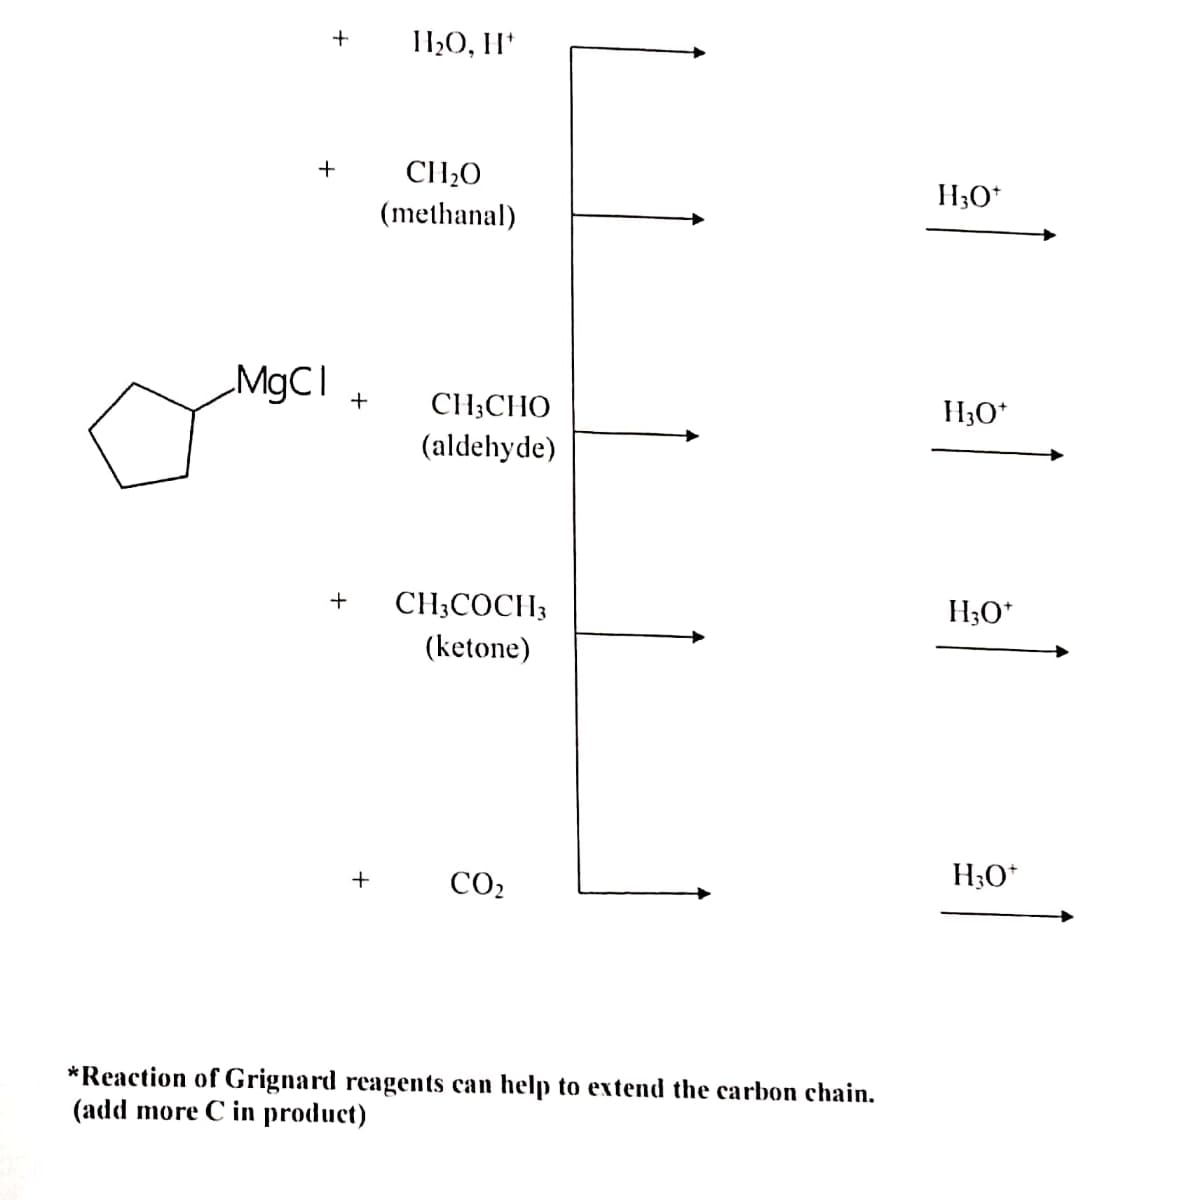 +
CH20
H;O*
(methanal)
+
CH;CHO
H3O*
(aldehyde)
+
CH;COCH3
H;O*
(ketone)
CO2
+
*Reaction of Grignard reagents can help to extend the carbon chain.
(add more C in product)
